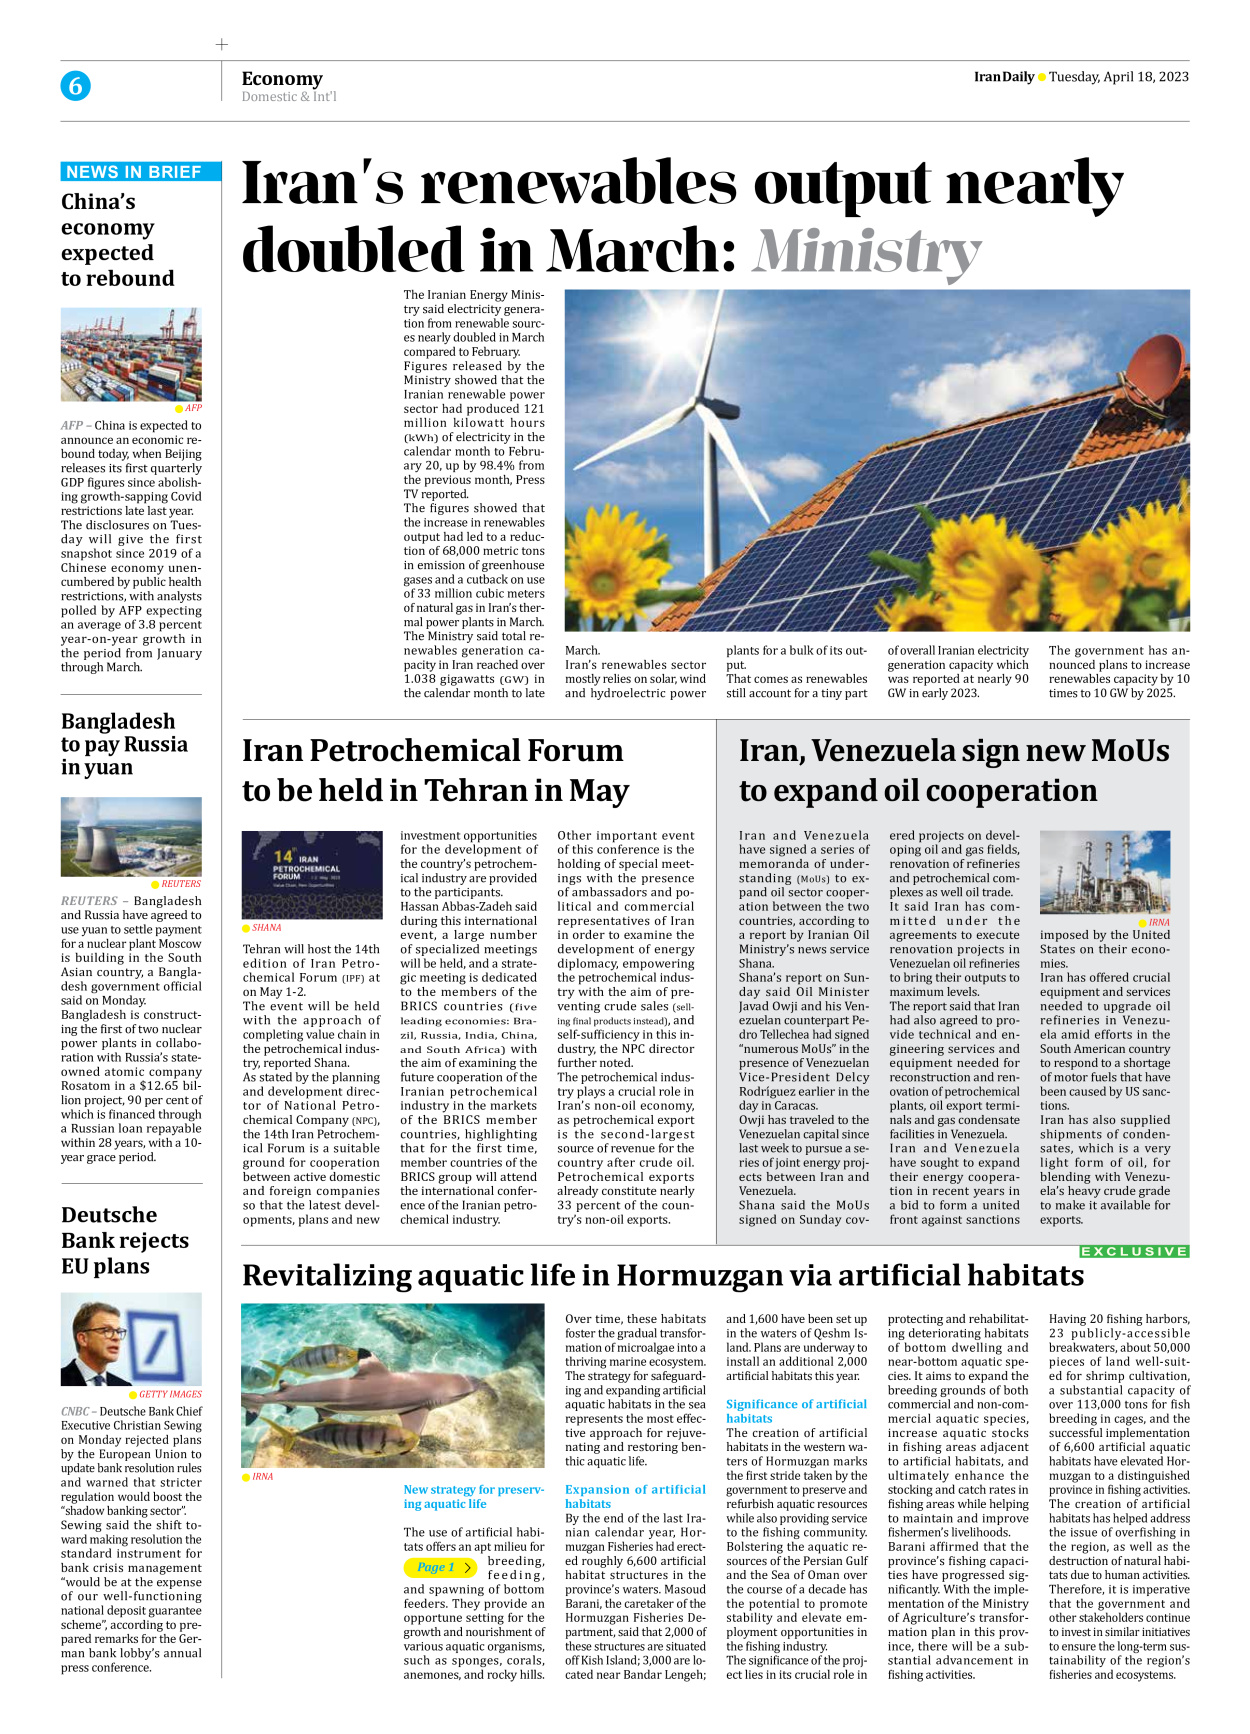 Iran Daily - Number Seven Thousand Two Hundred and Seventy One - 18 April 2023 - Page 6